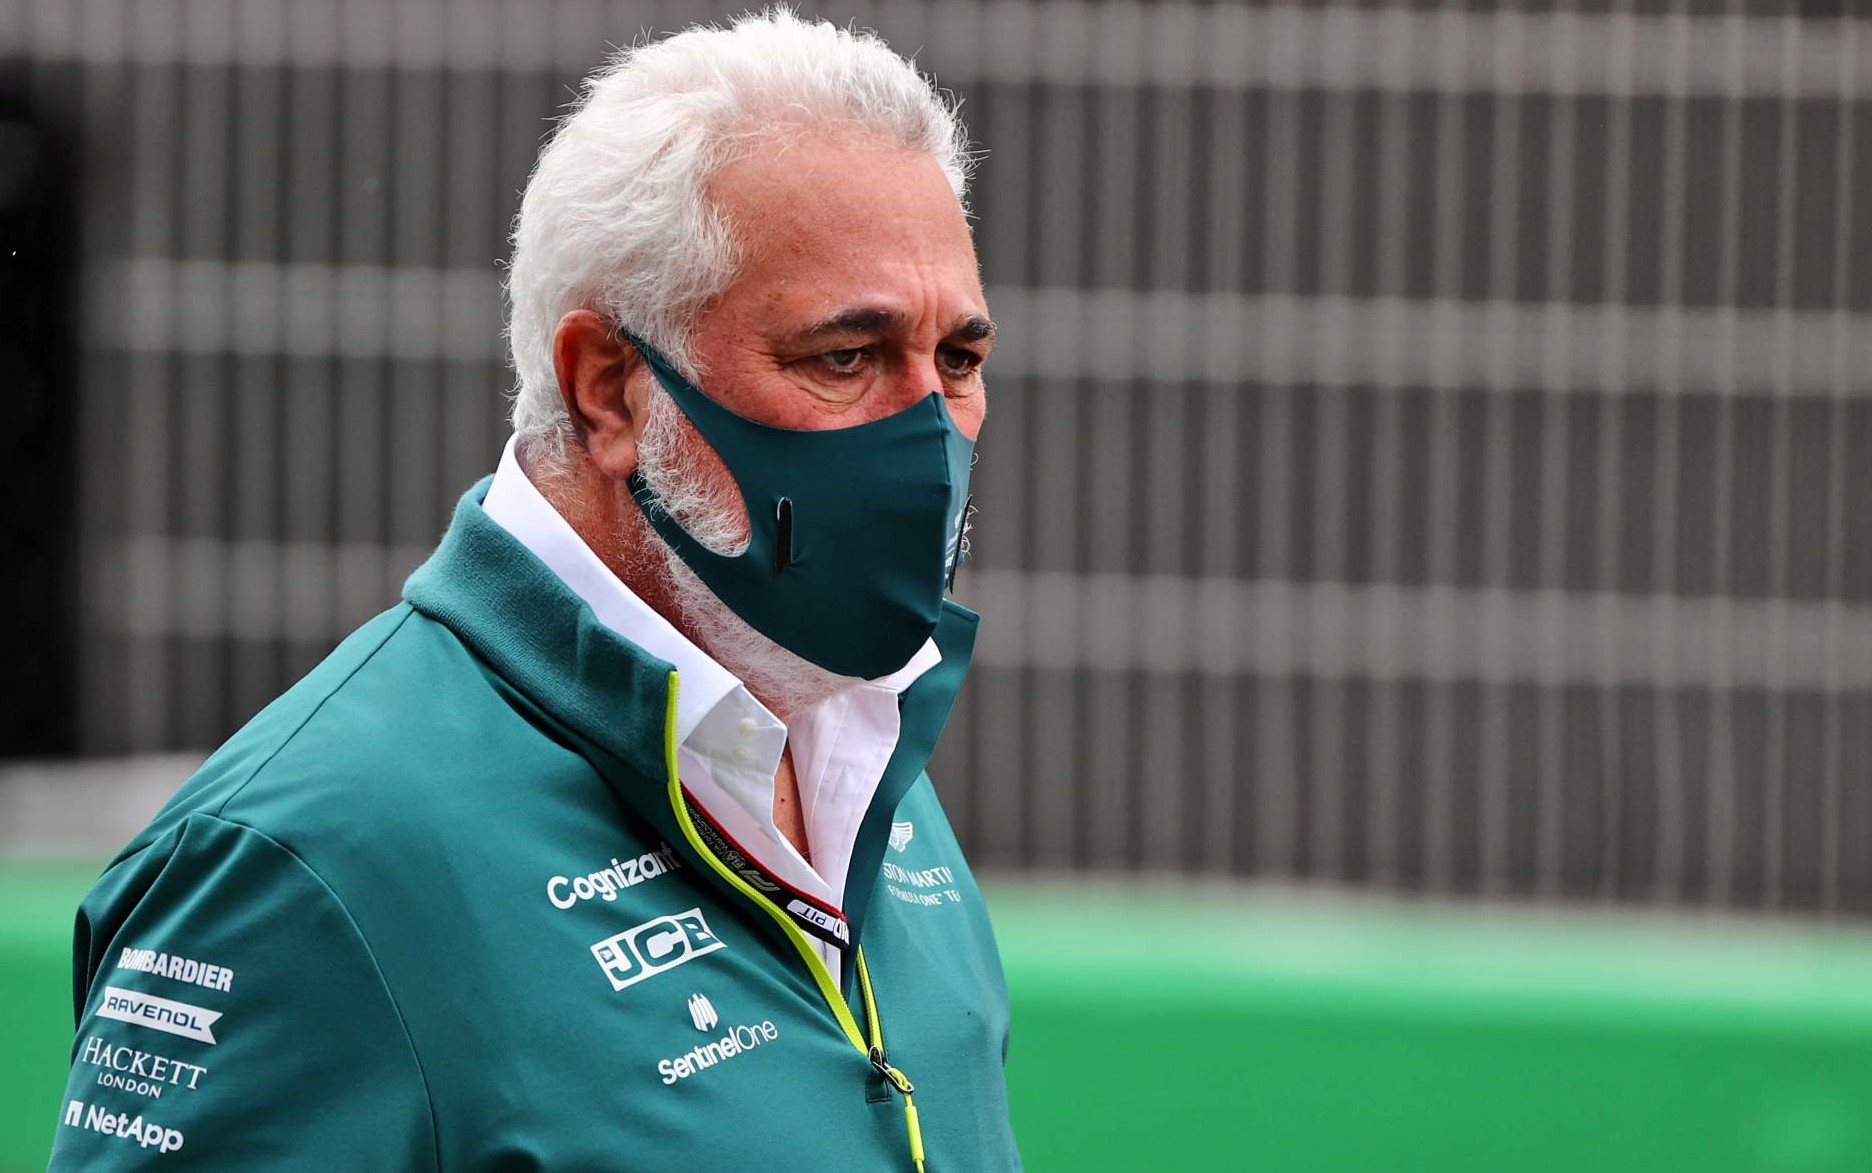 Former team boss claims Aston Martin is going nowhere under Stroll